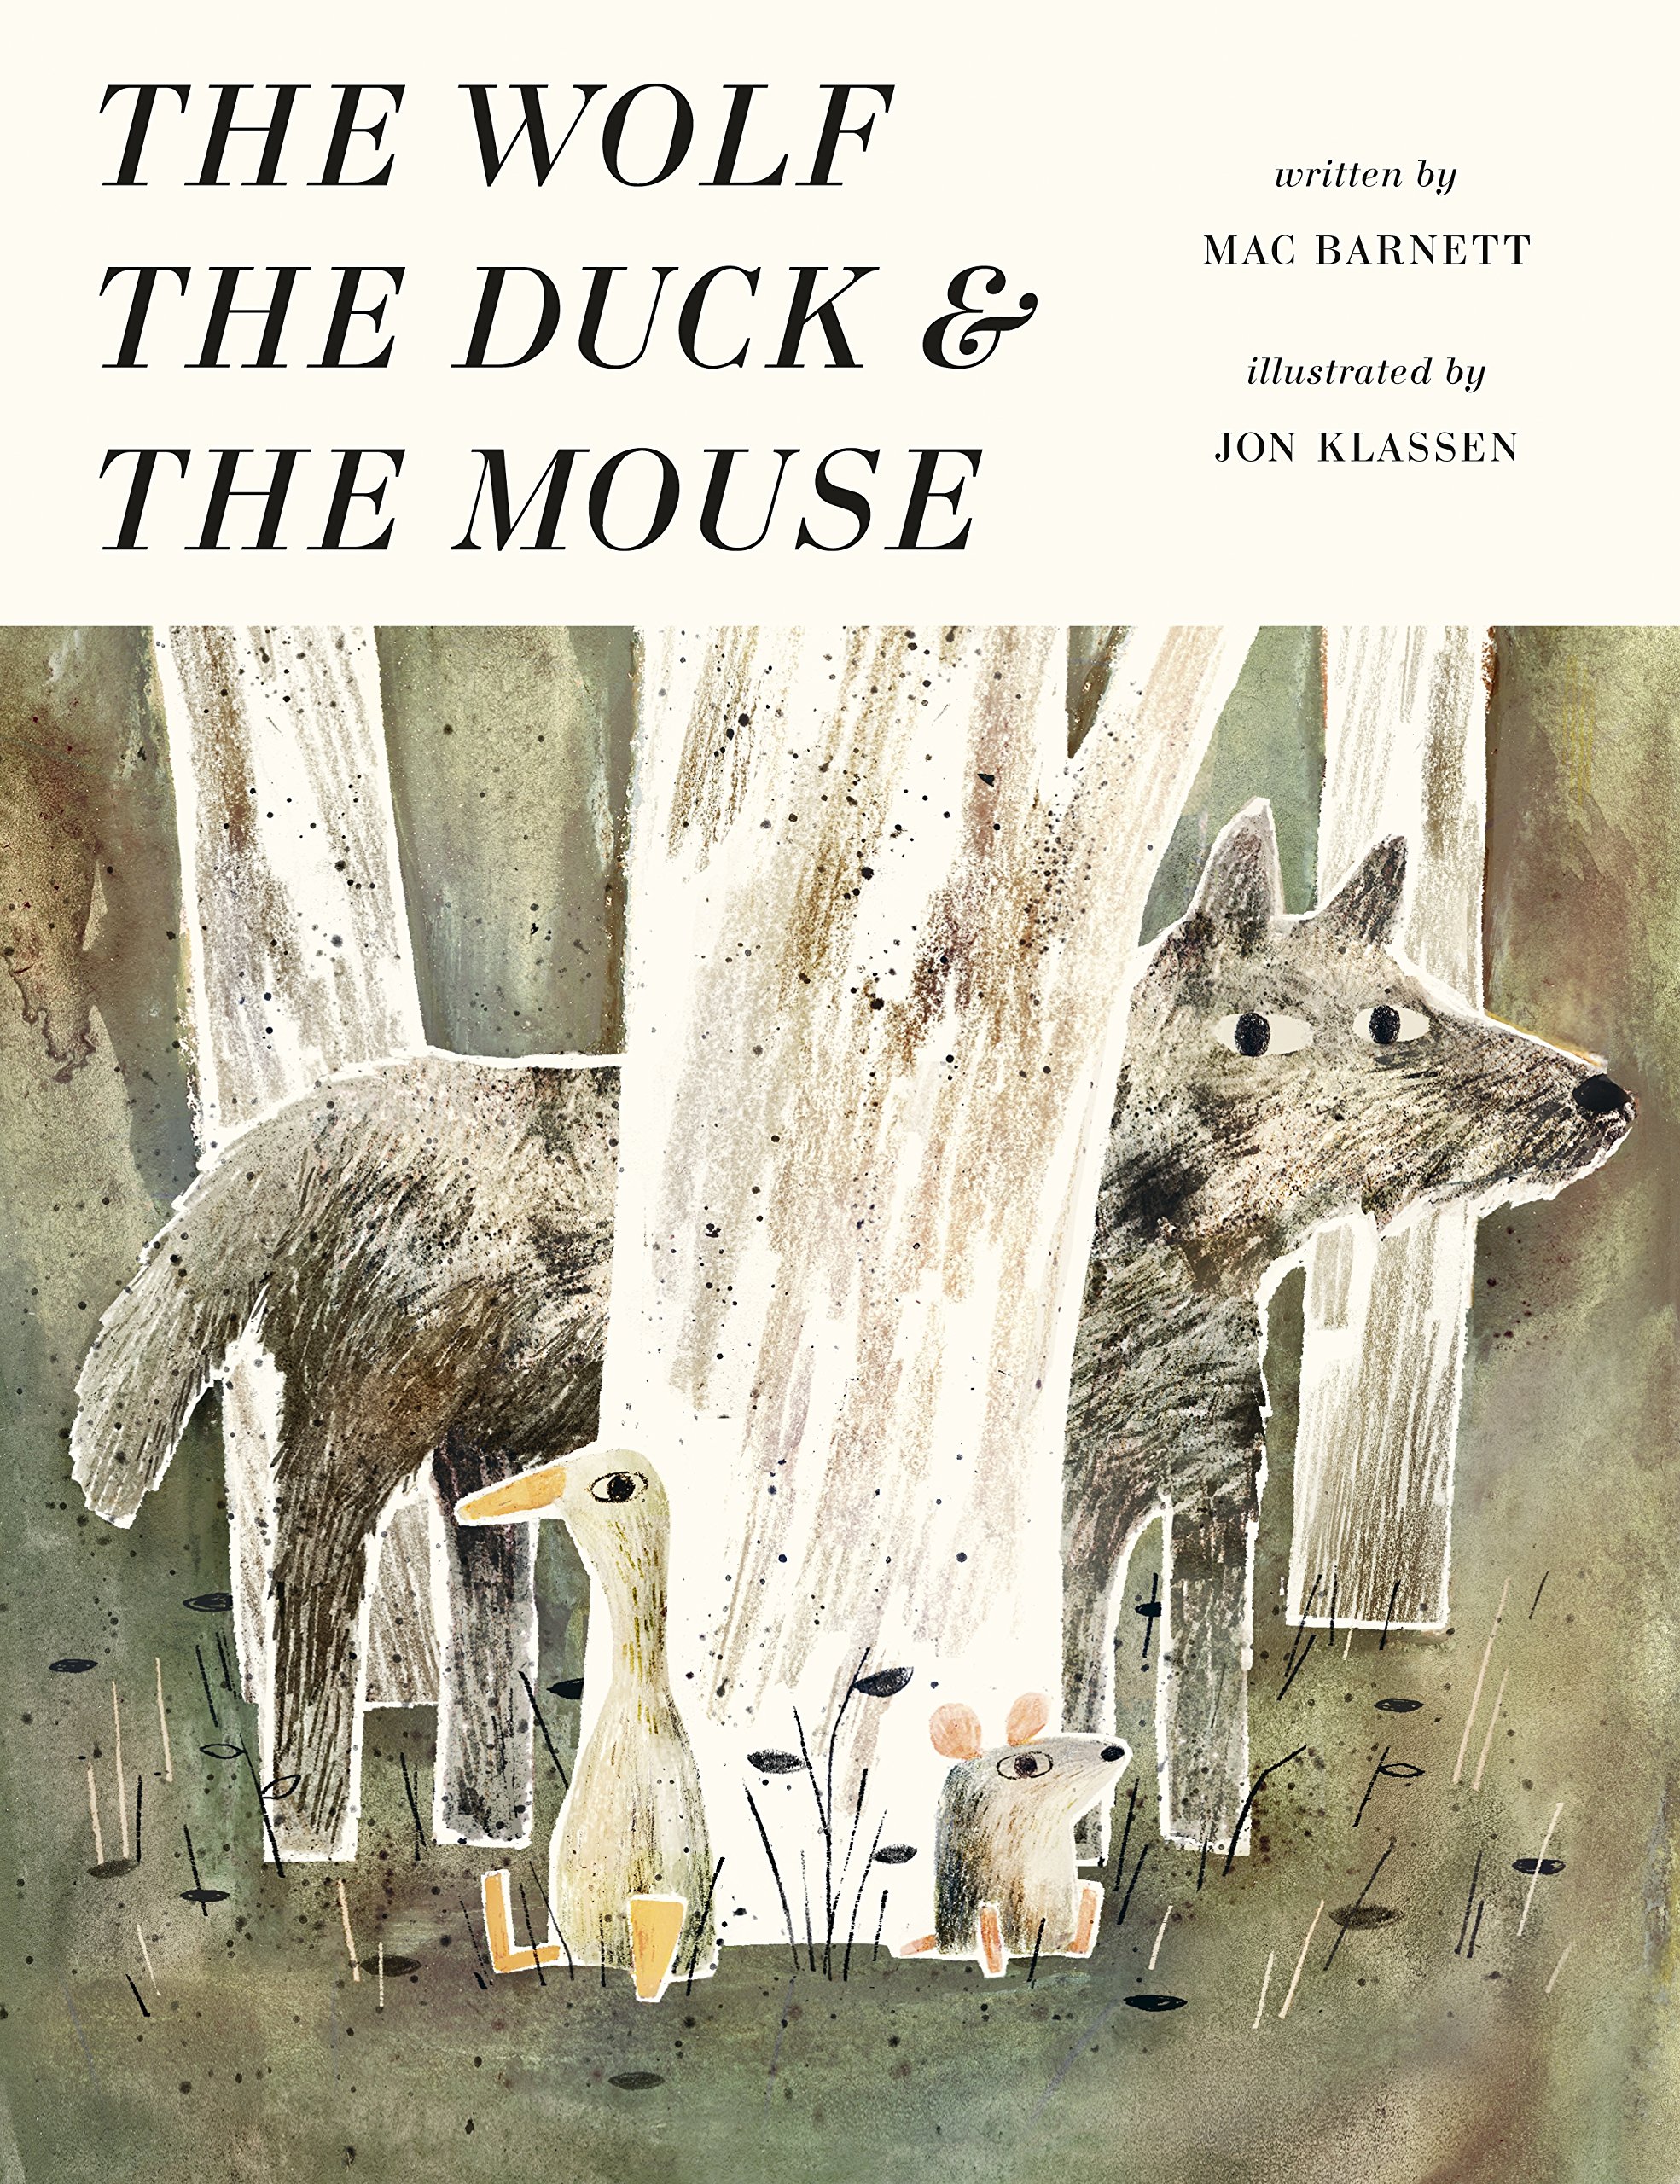 The Wolf, The Duck and the Mouse, Jon Klassen